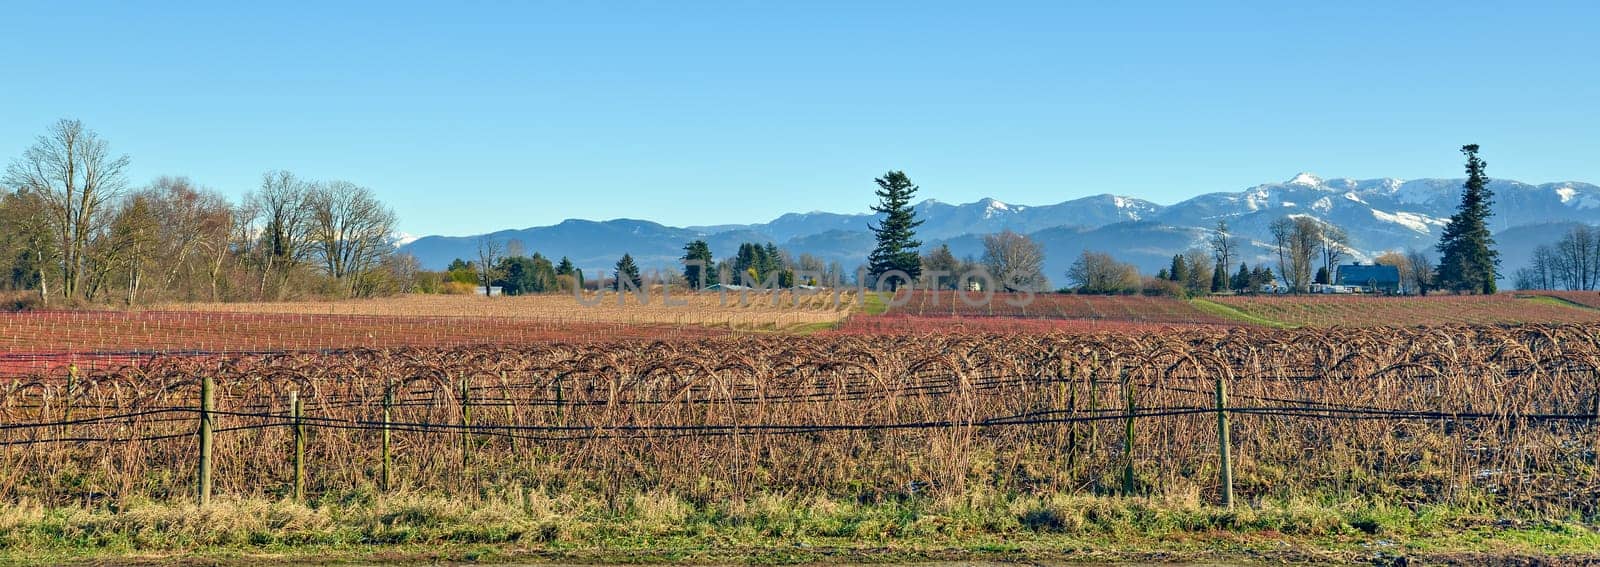 Bluberry farm with mountain view on winter season in the Fraser valley, British Columbia, Canada.